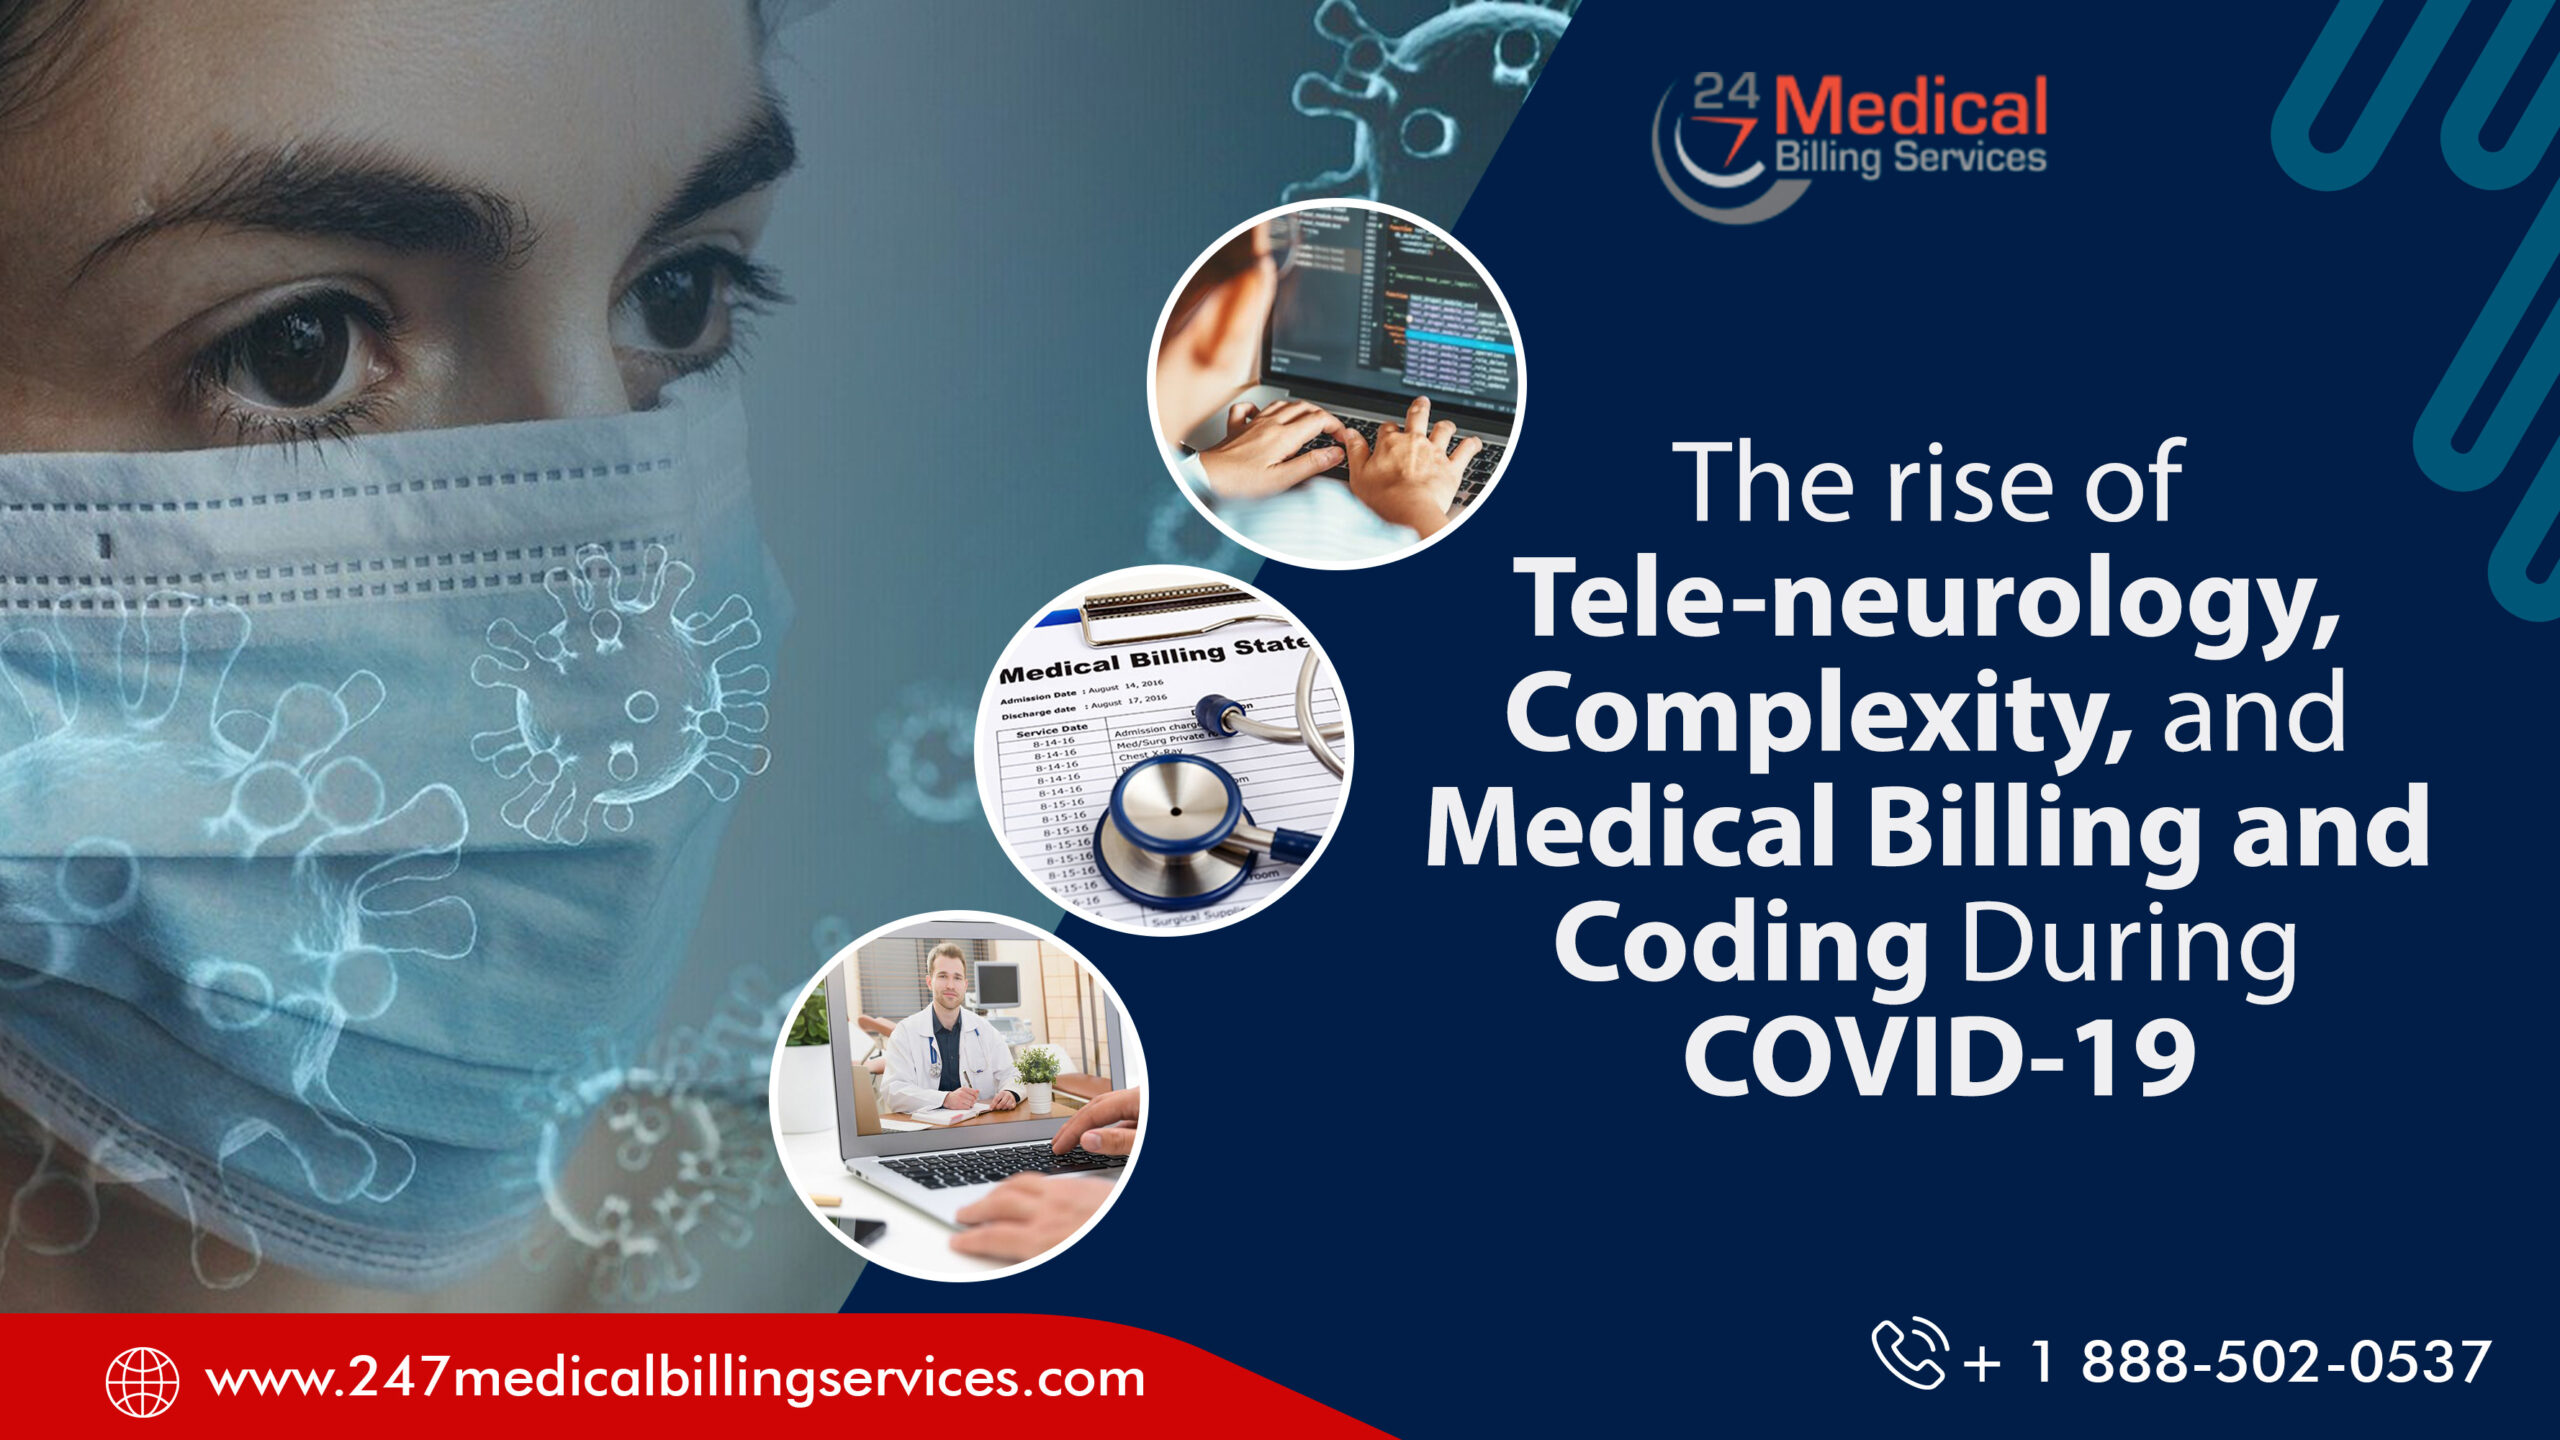  The Rise of Tele Neurology, Complexity, and Medical Billing and Coding during COVID-19